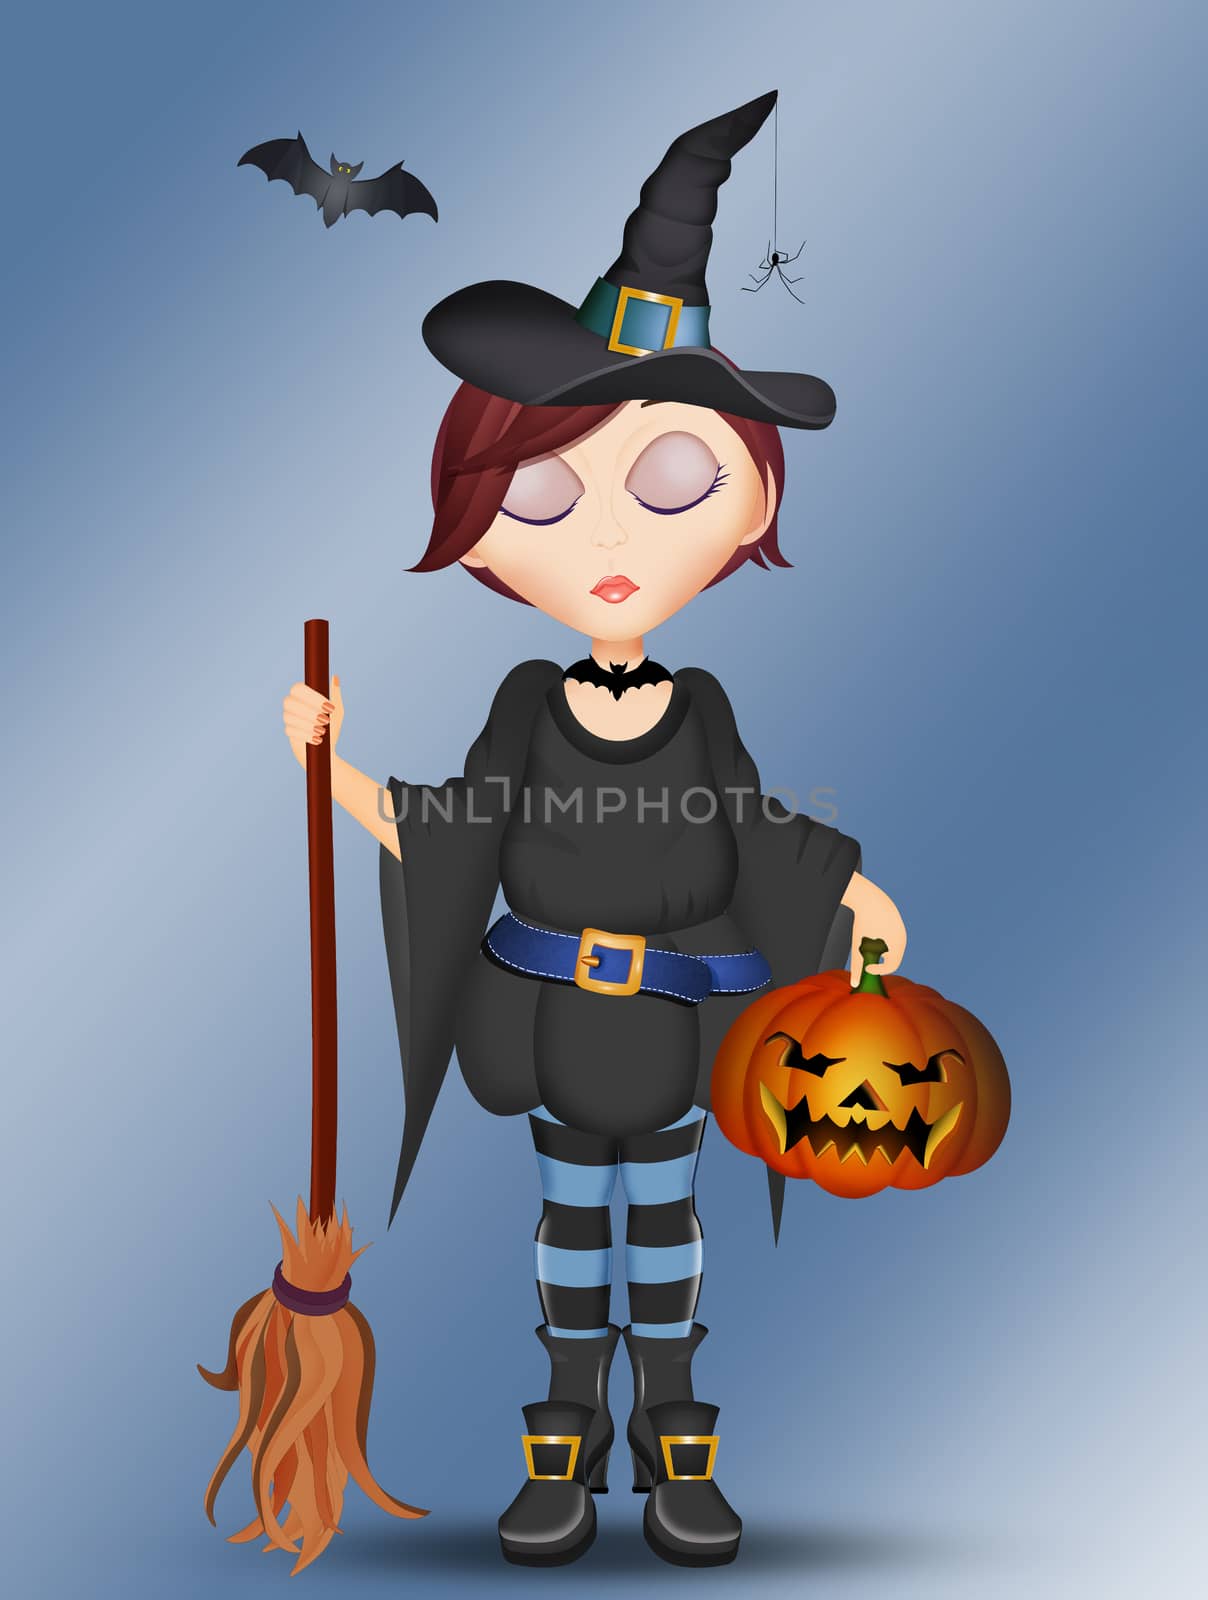 illustration of Halloween witch with pumpkin by adrenalina